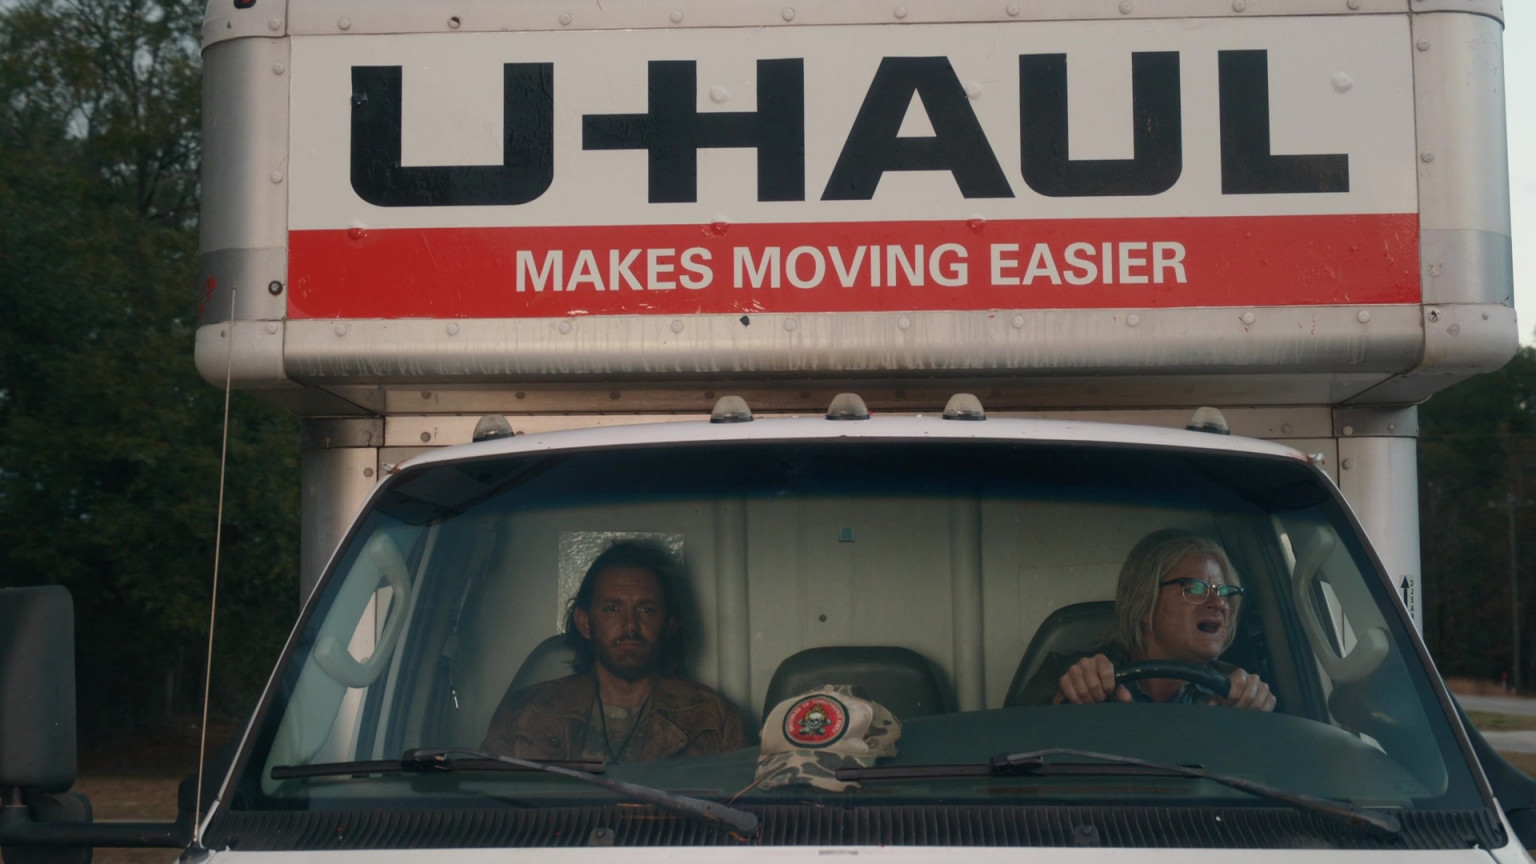 U-haul Moving Truck in The Righteous Gemstones